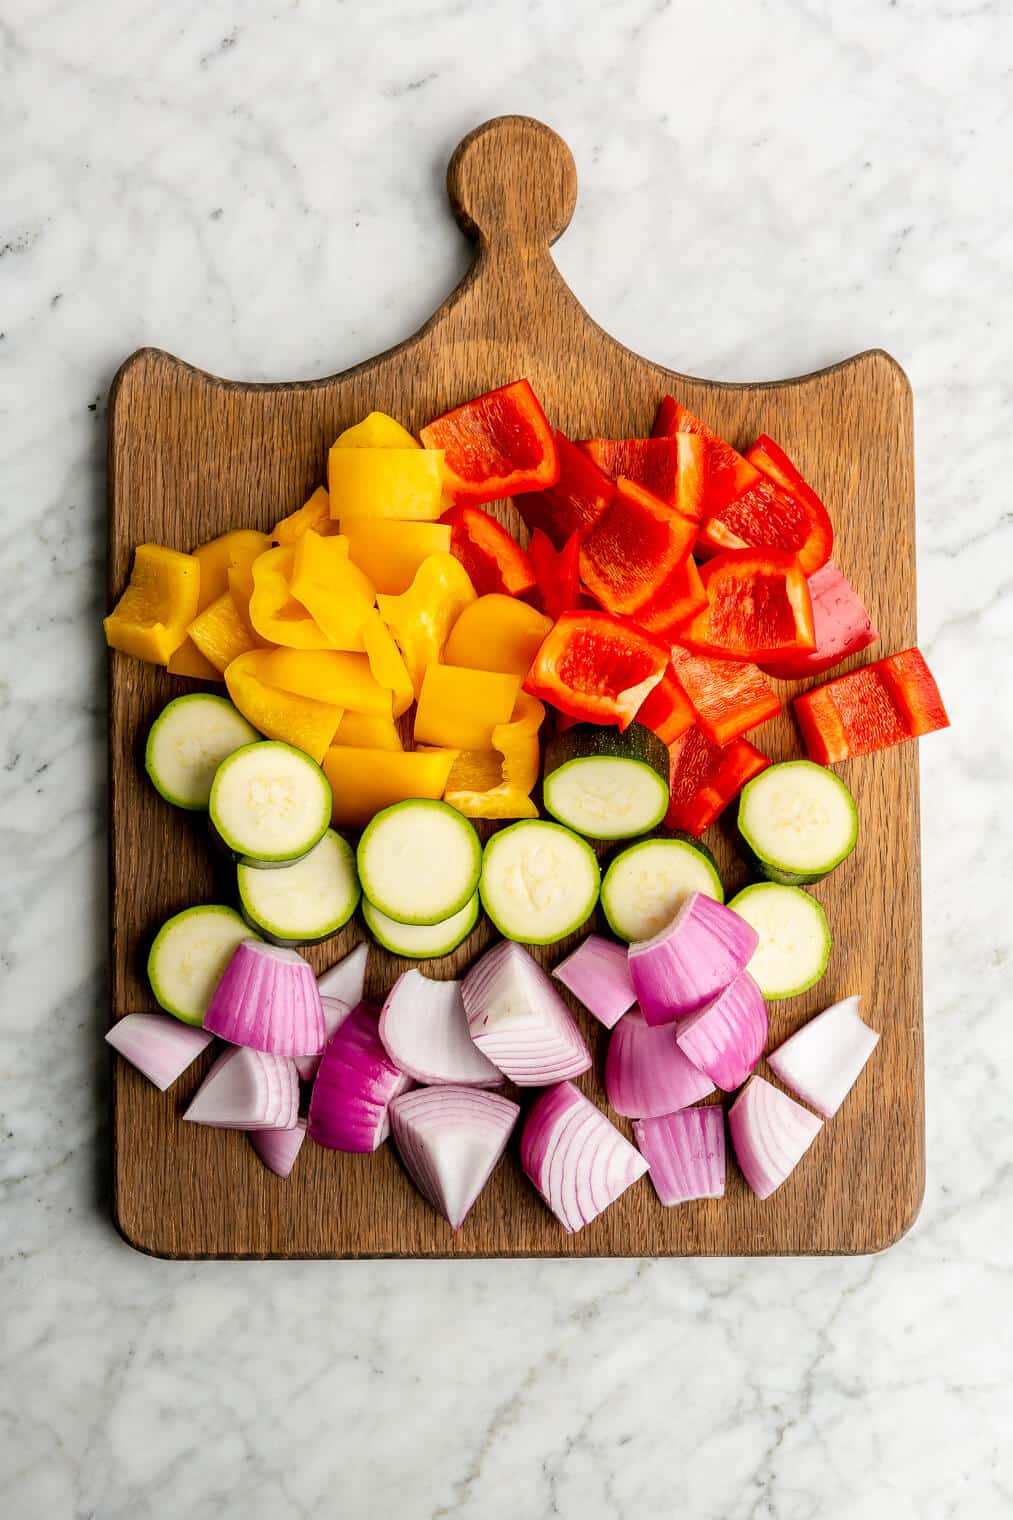 Cut veggies for chicken and veggie kabobs on a wooden cutting board.